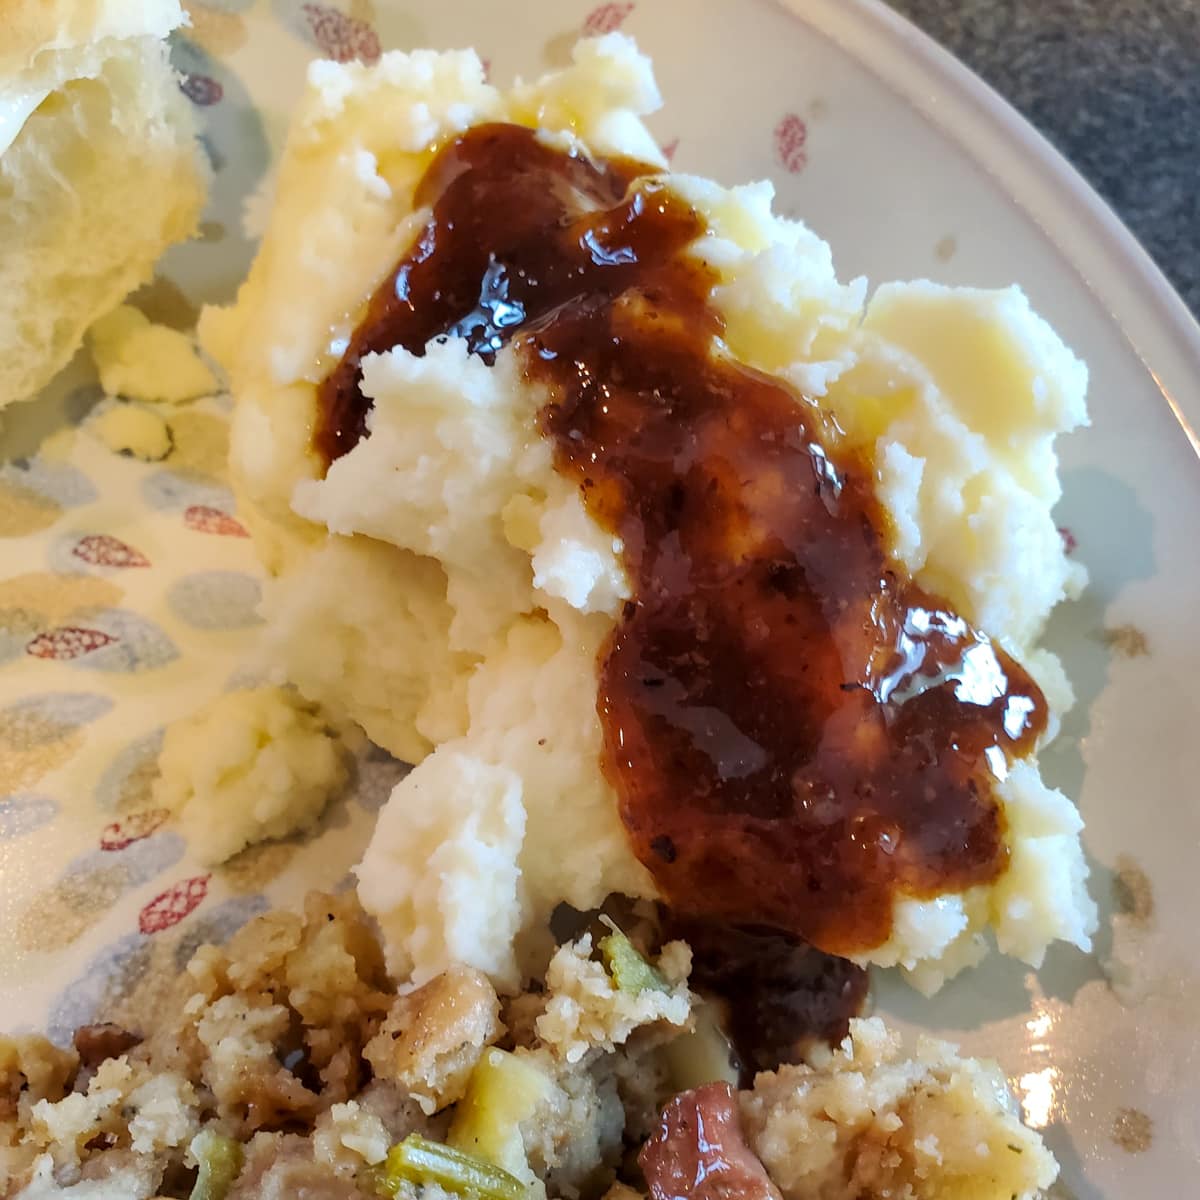 Smoked giblet gravy over mashed potatoes.